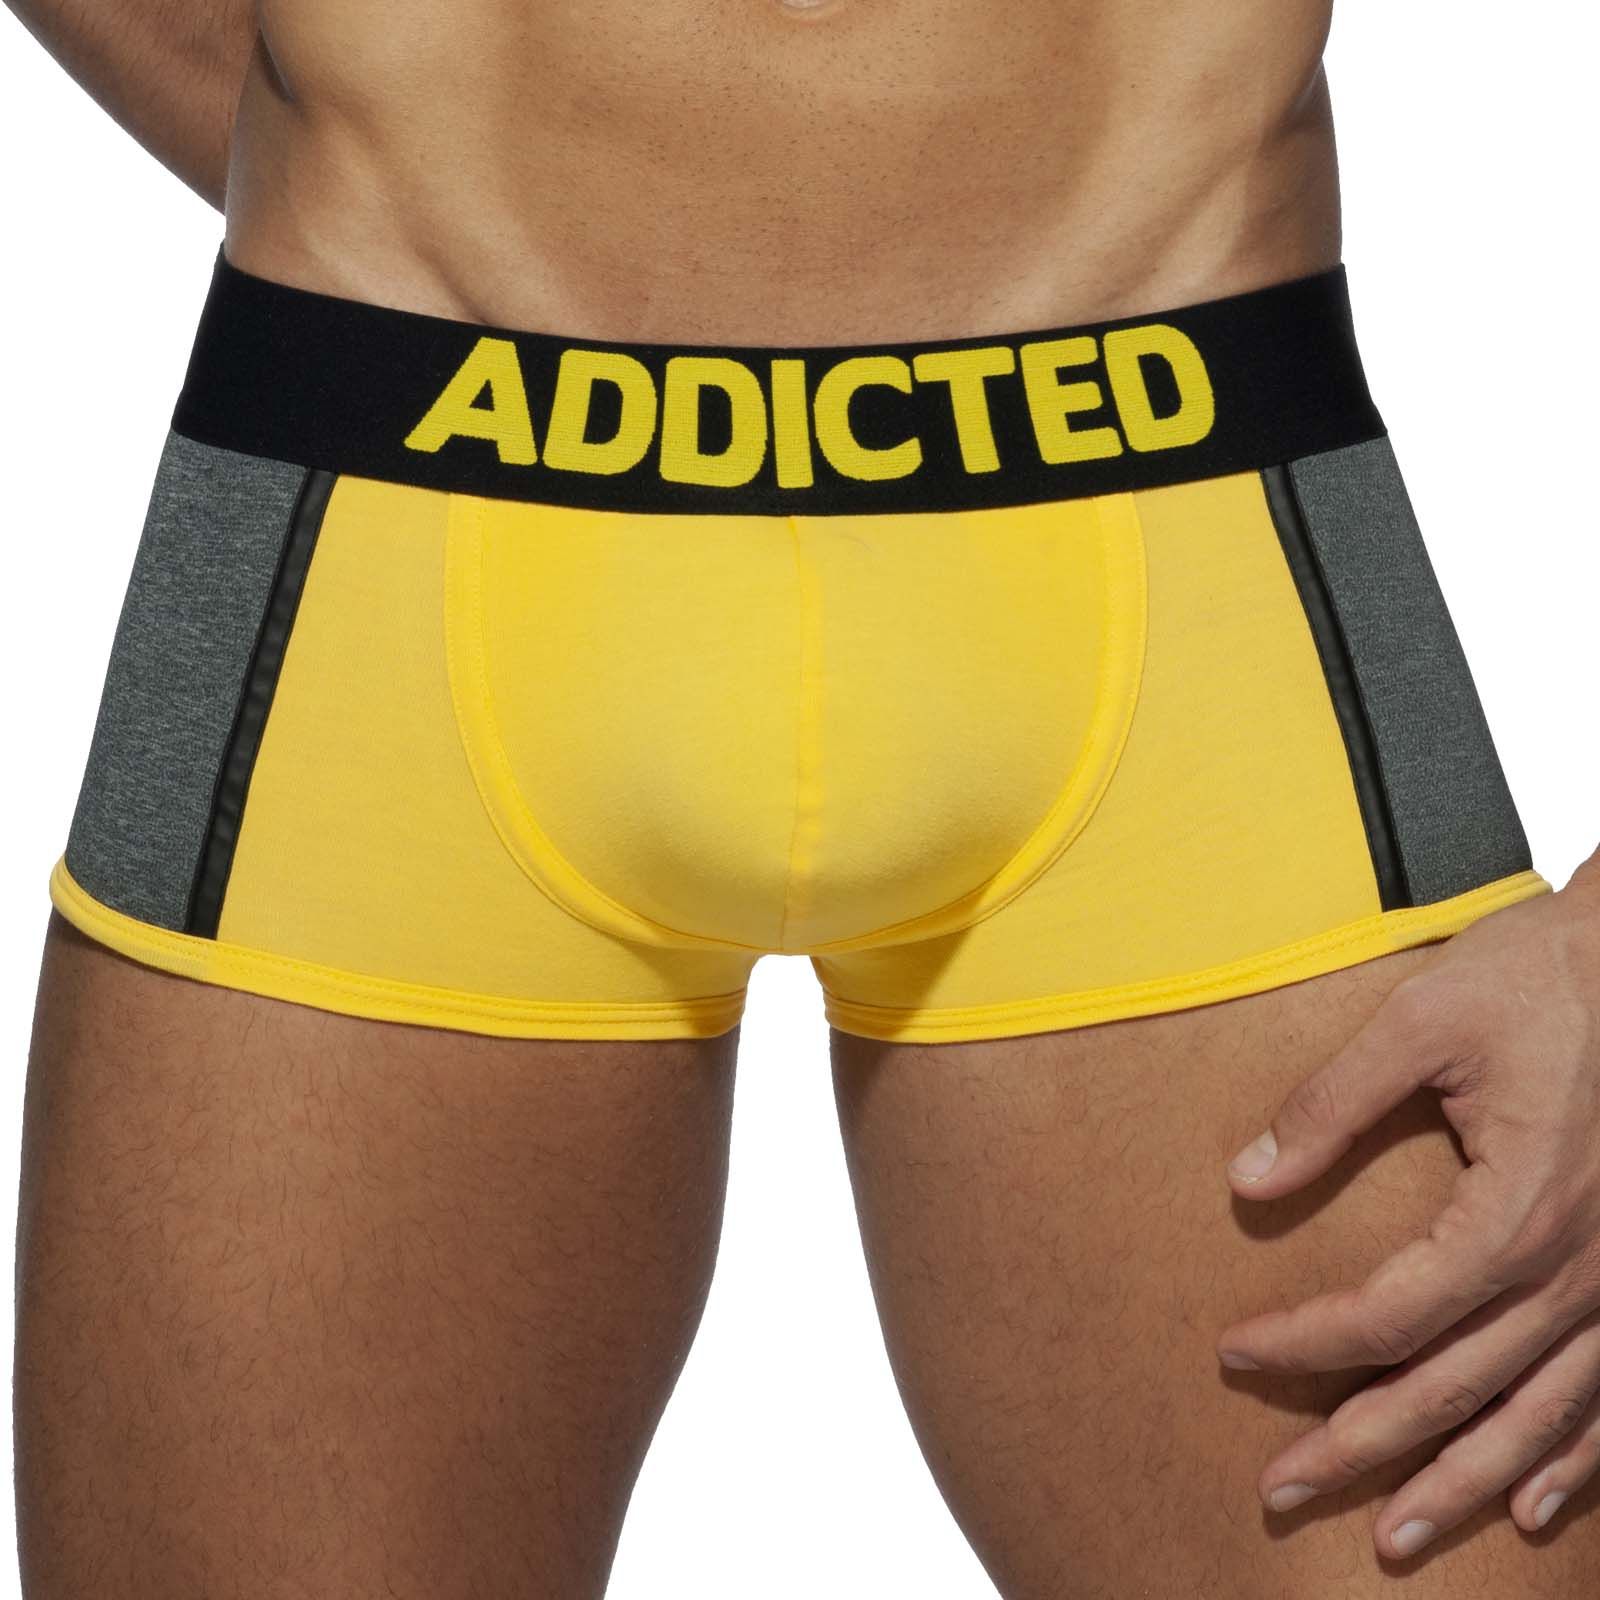 Boxer Addicted Spacer AD787